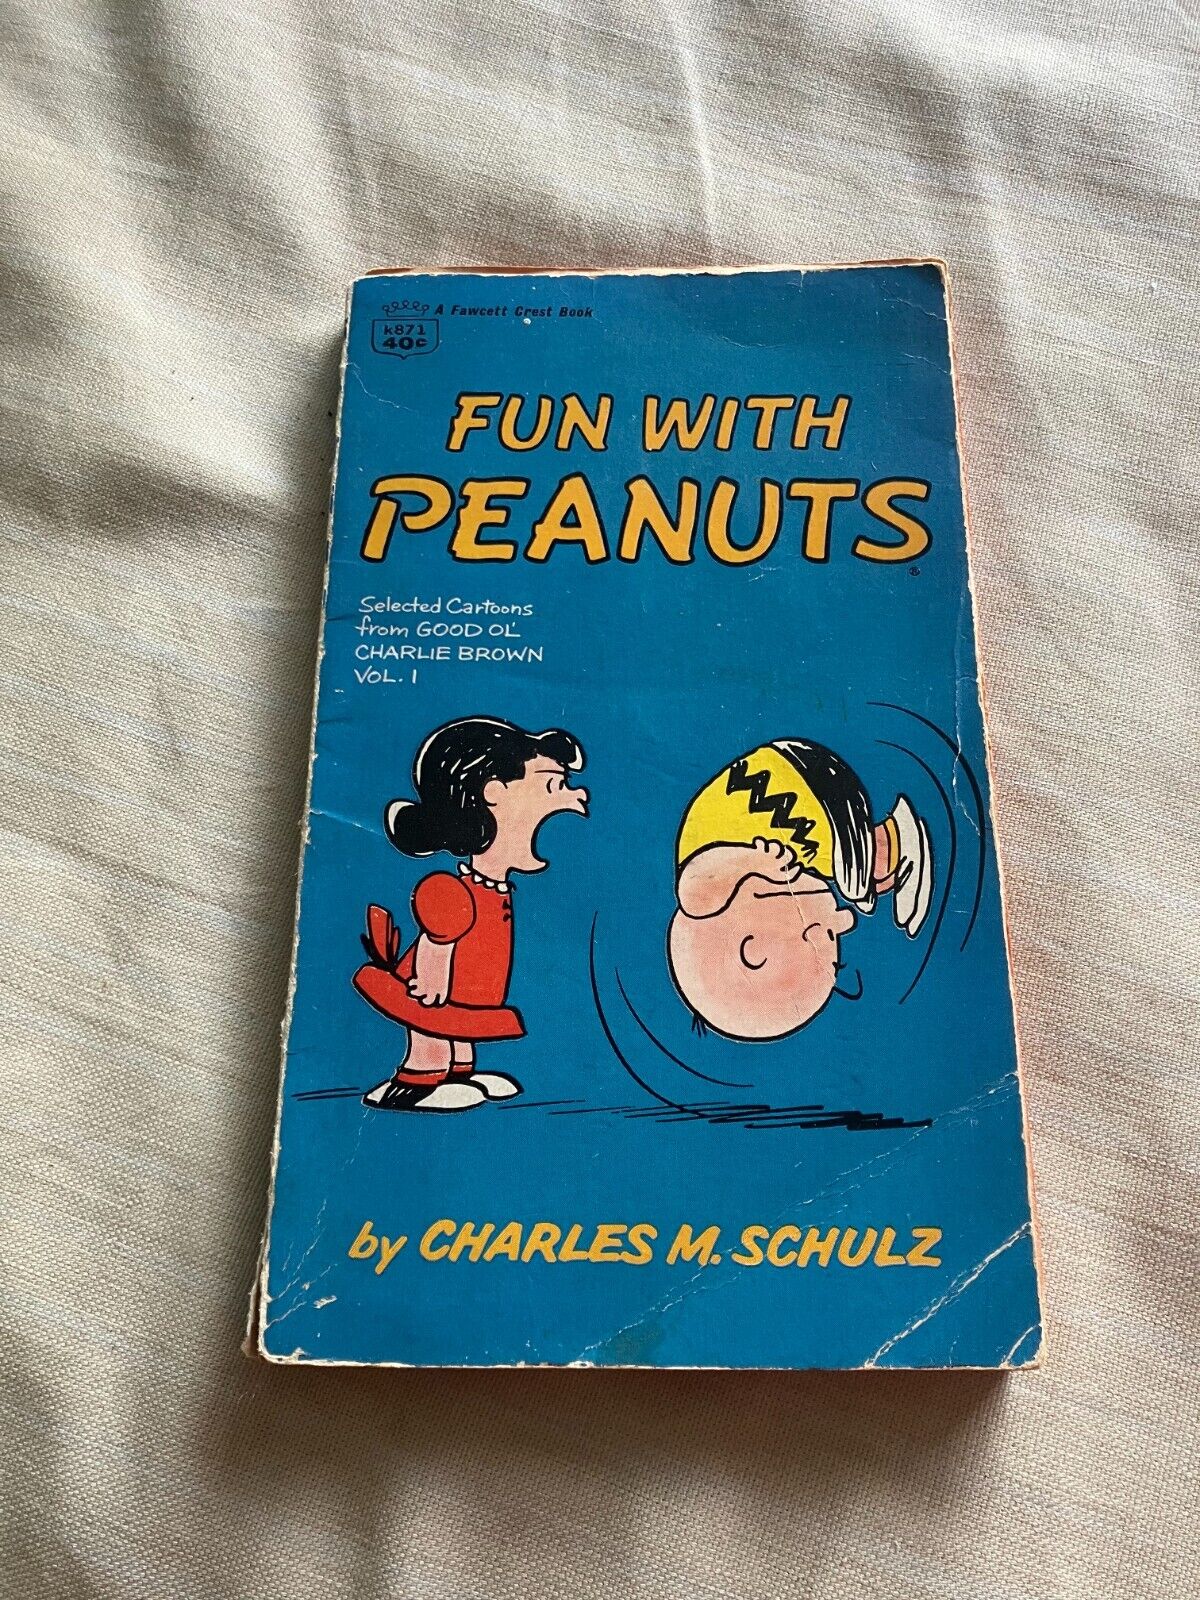 Vintage 1968 Fun with Peanuts Book by Charles M. Schulz - Preowned